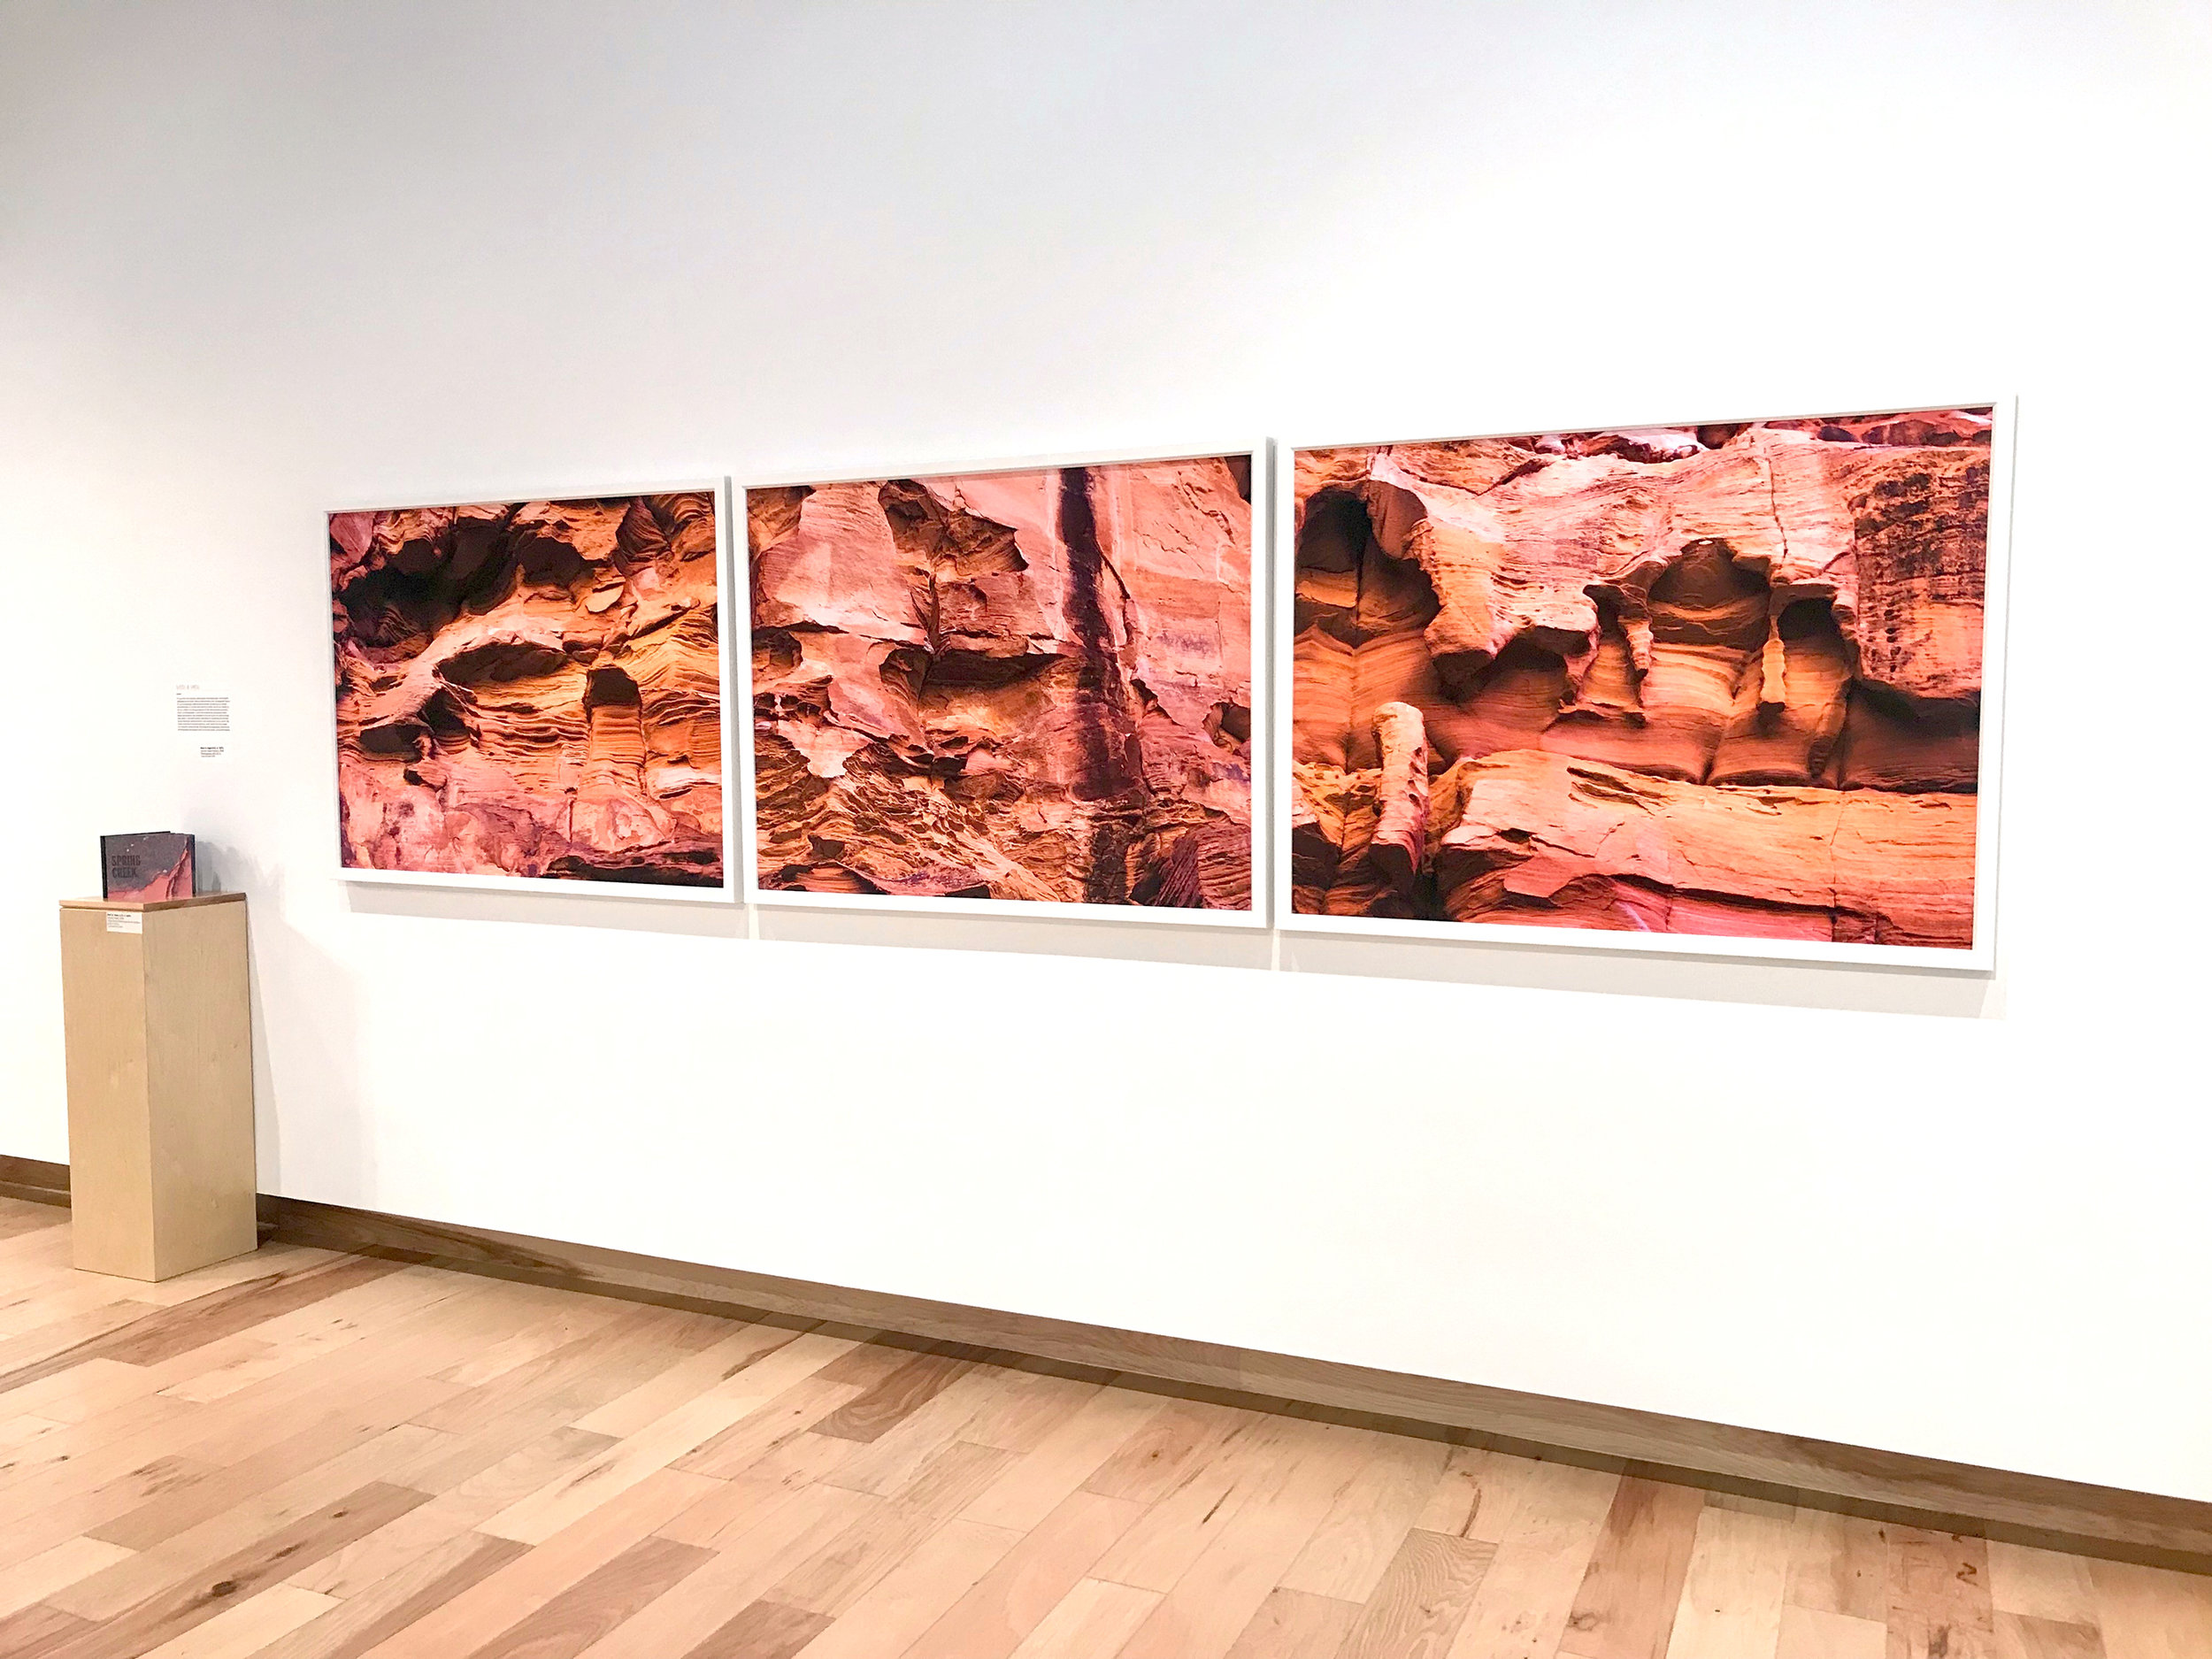 Impact Exhibition at Southern Utah Museum of Art, 2019